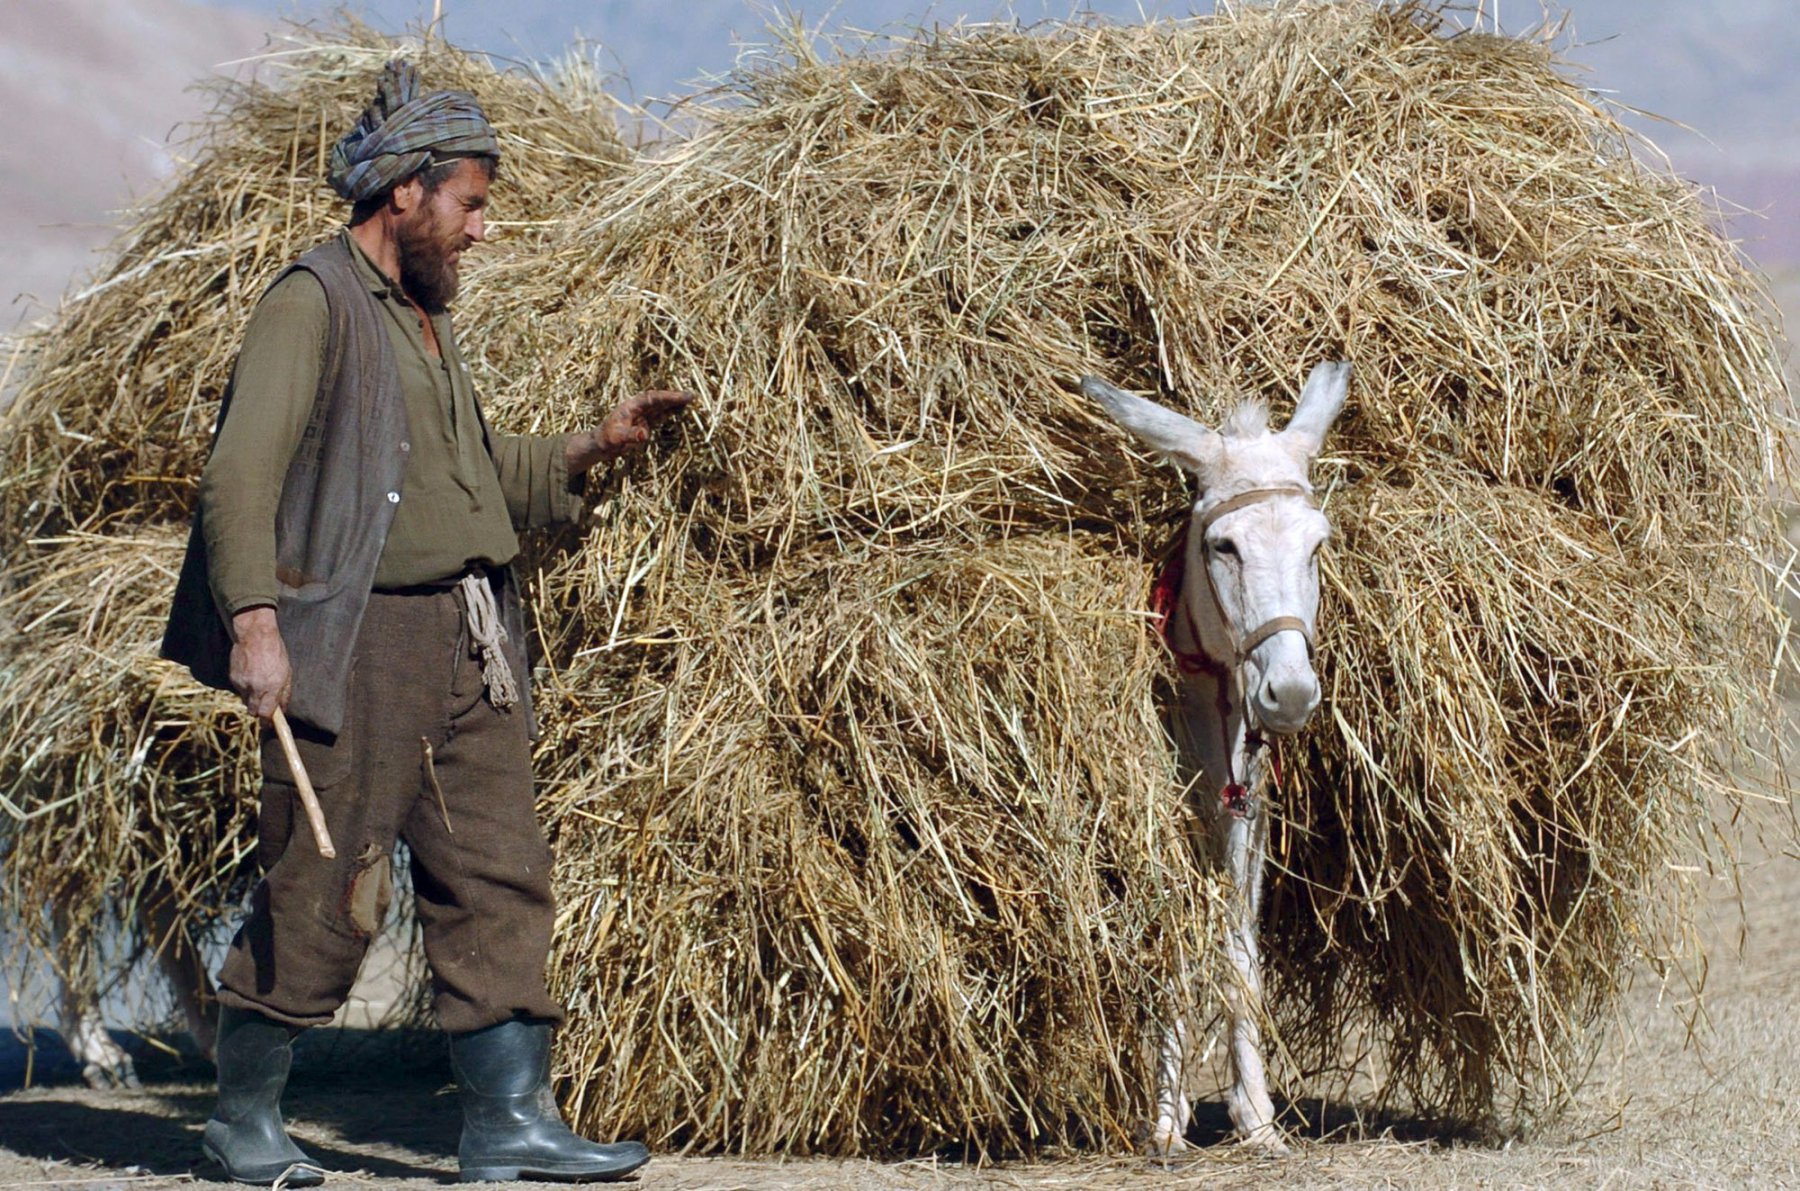 An Afghan farmer leads a donkey carrying lots of straw over a road in the Afghan province of Takar. Takar is one of four Afghan provinces guarded by the German federal armed forces. Photo: Boris Roessler/dpa